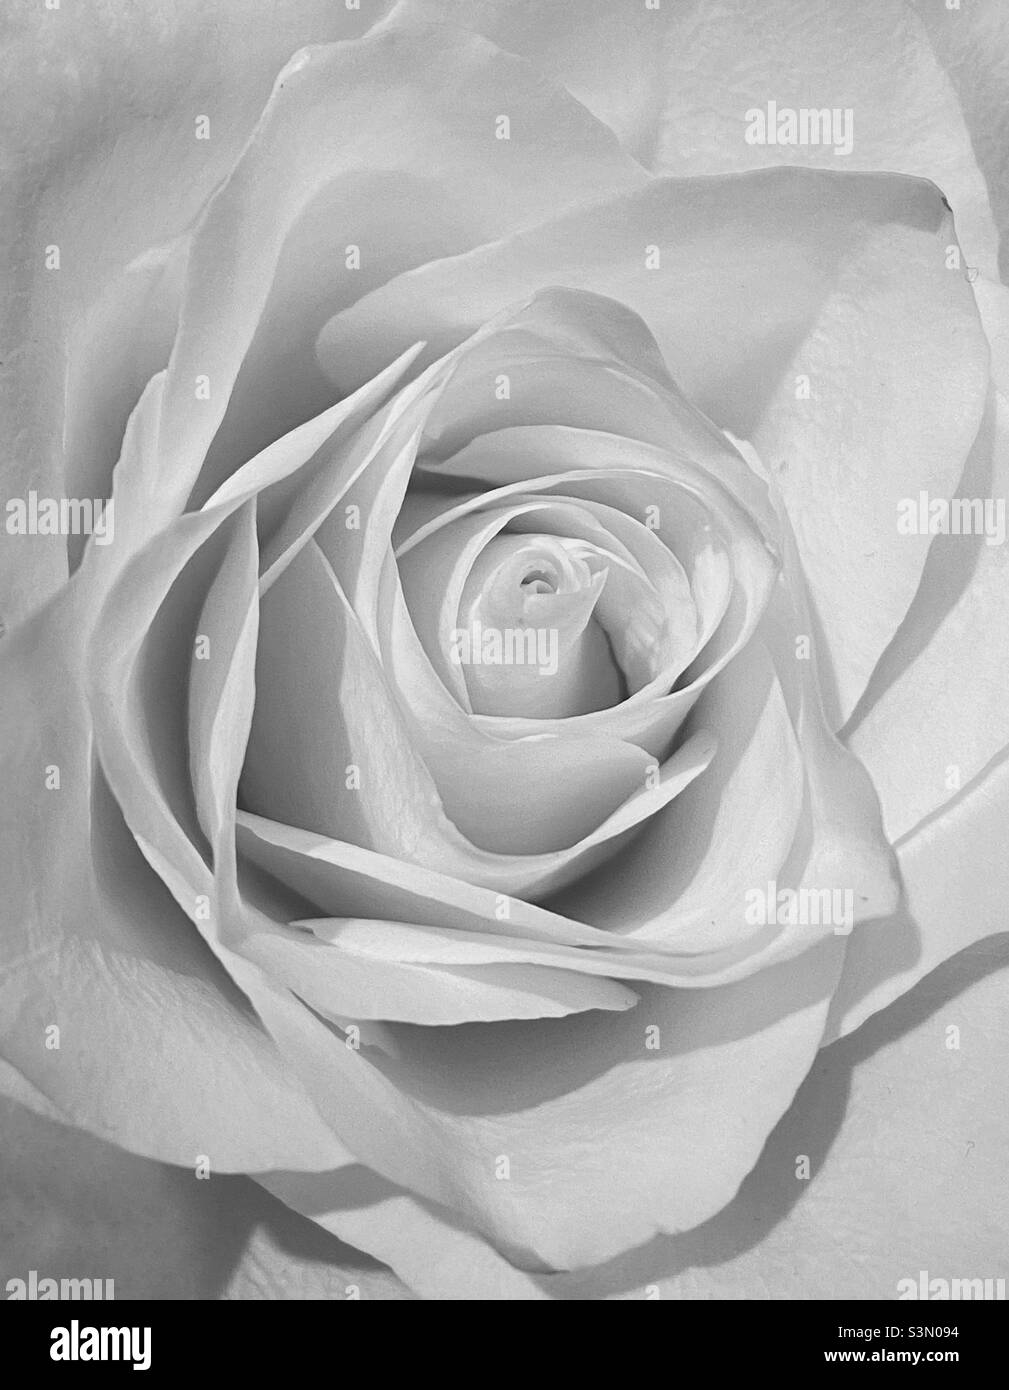 A close up image of a rose bud showing the various petals. A monochrome image with many potential uses. Wedding? Funerals? Christenings? Photo ©️ COLIN HOSKINS. Stock Photo